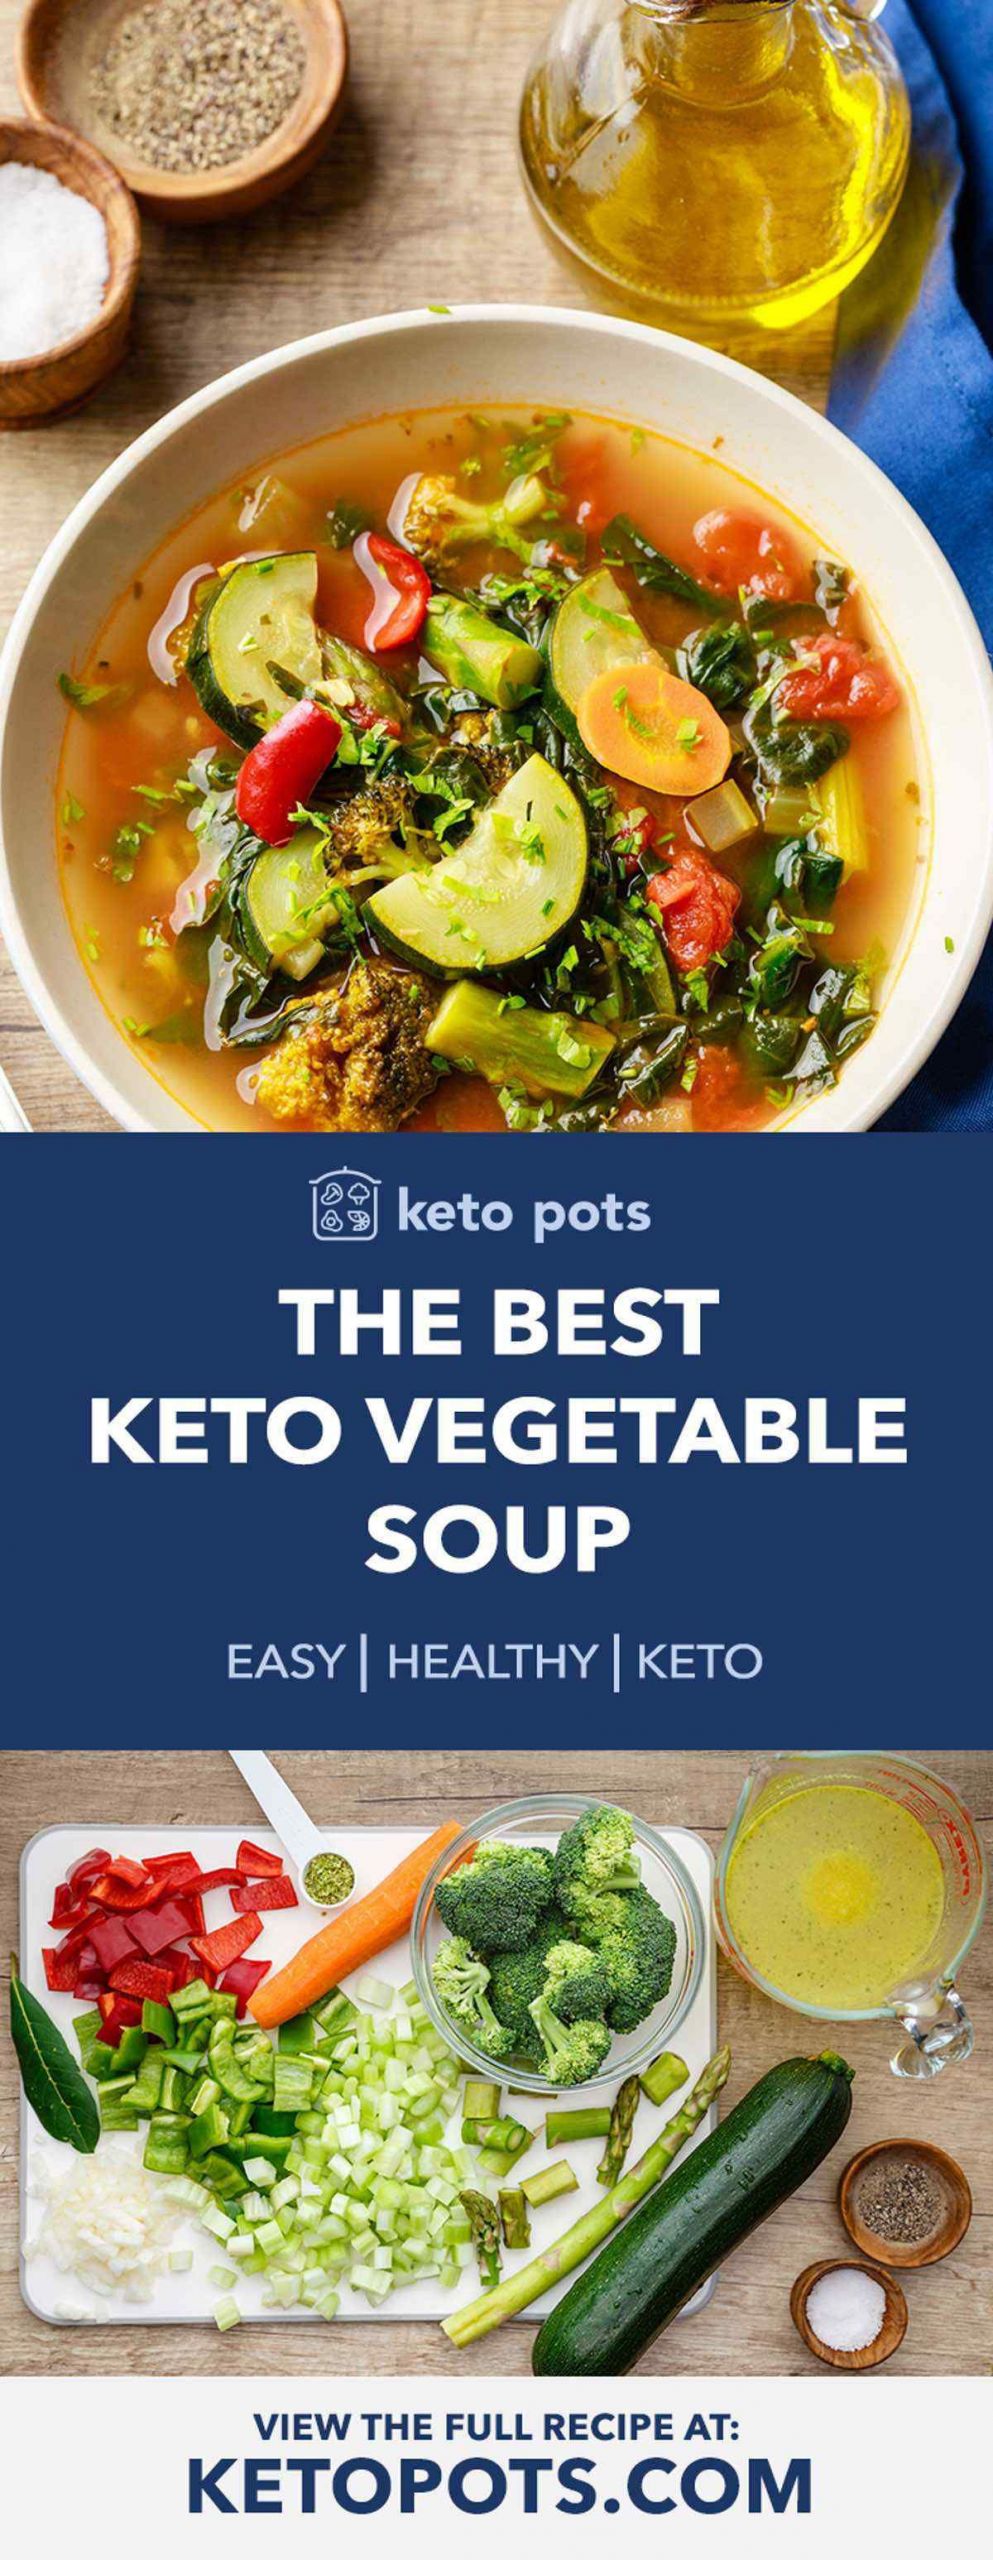 Vegetarian Keto Soup Recipes
 Out of This World Keto Ve able Soup Wholesome and